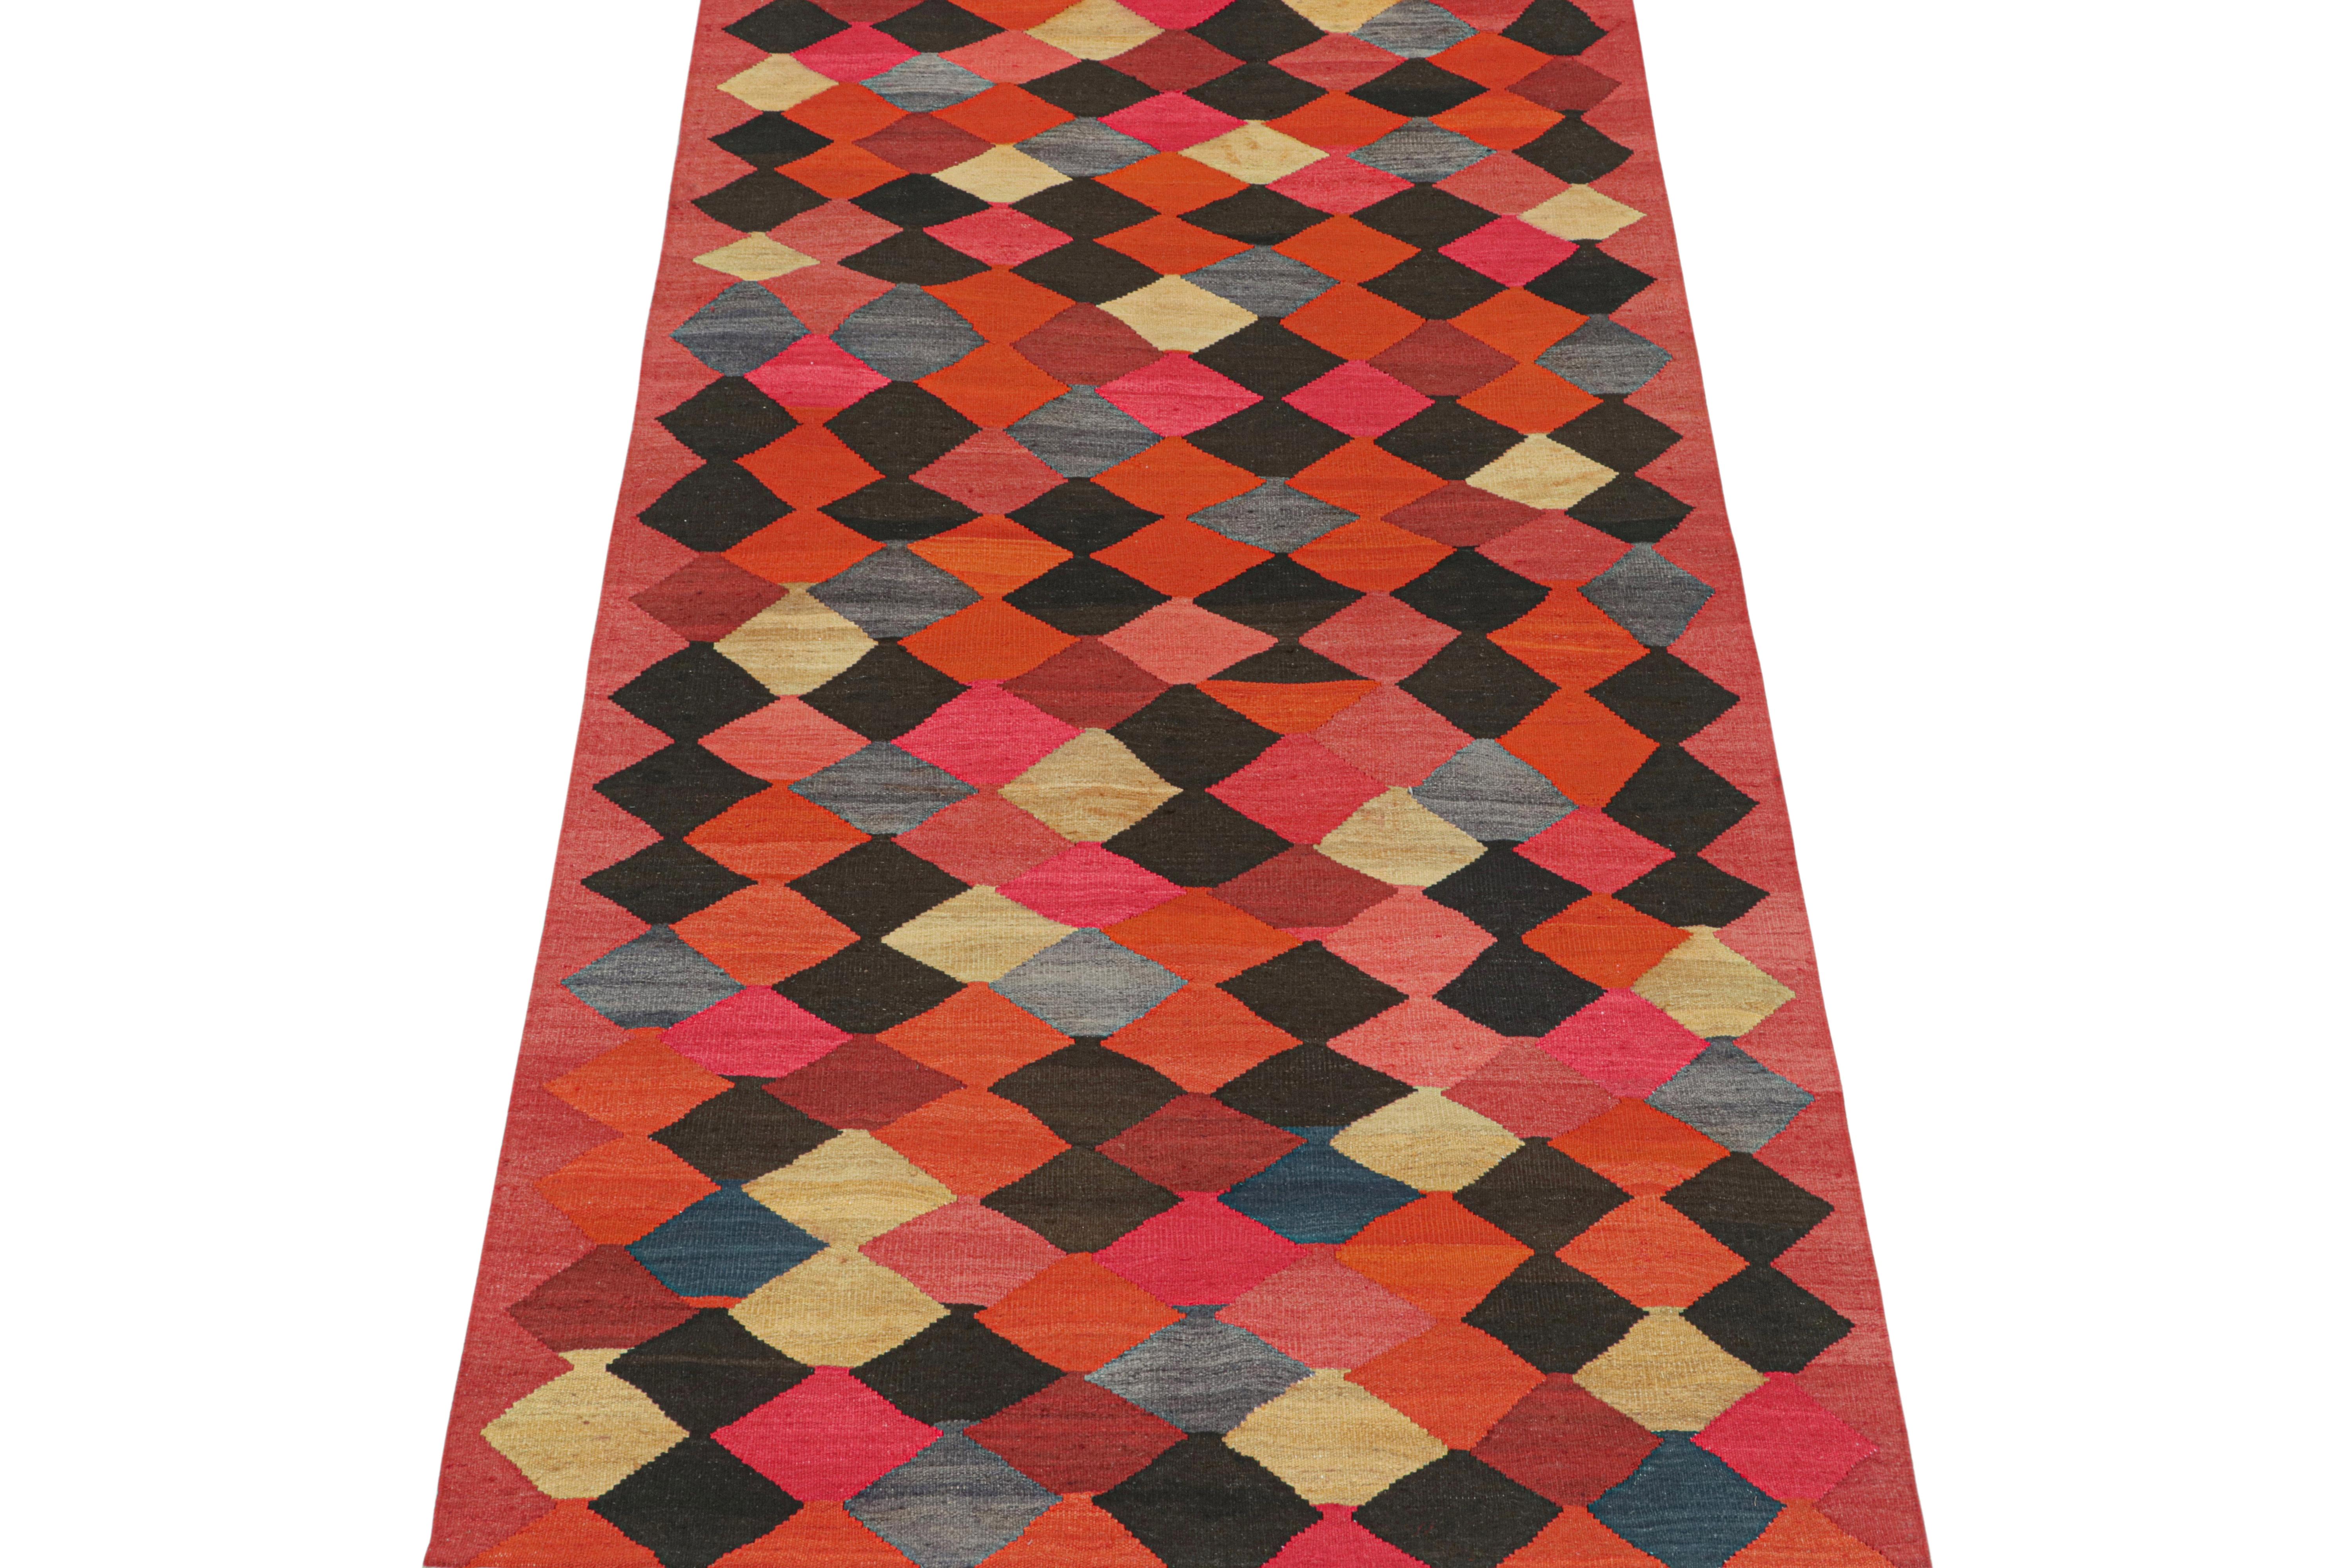 This vintage 4x8 Persian Kilim is believed to be a tribal runner of Karadagh—a mountainous region known for its Craft. Handwoven in wool, it originates circa 1950-1960.

Design:

The bold design prefers geometric patterns in polychromatic tones,